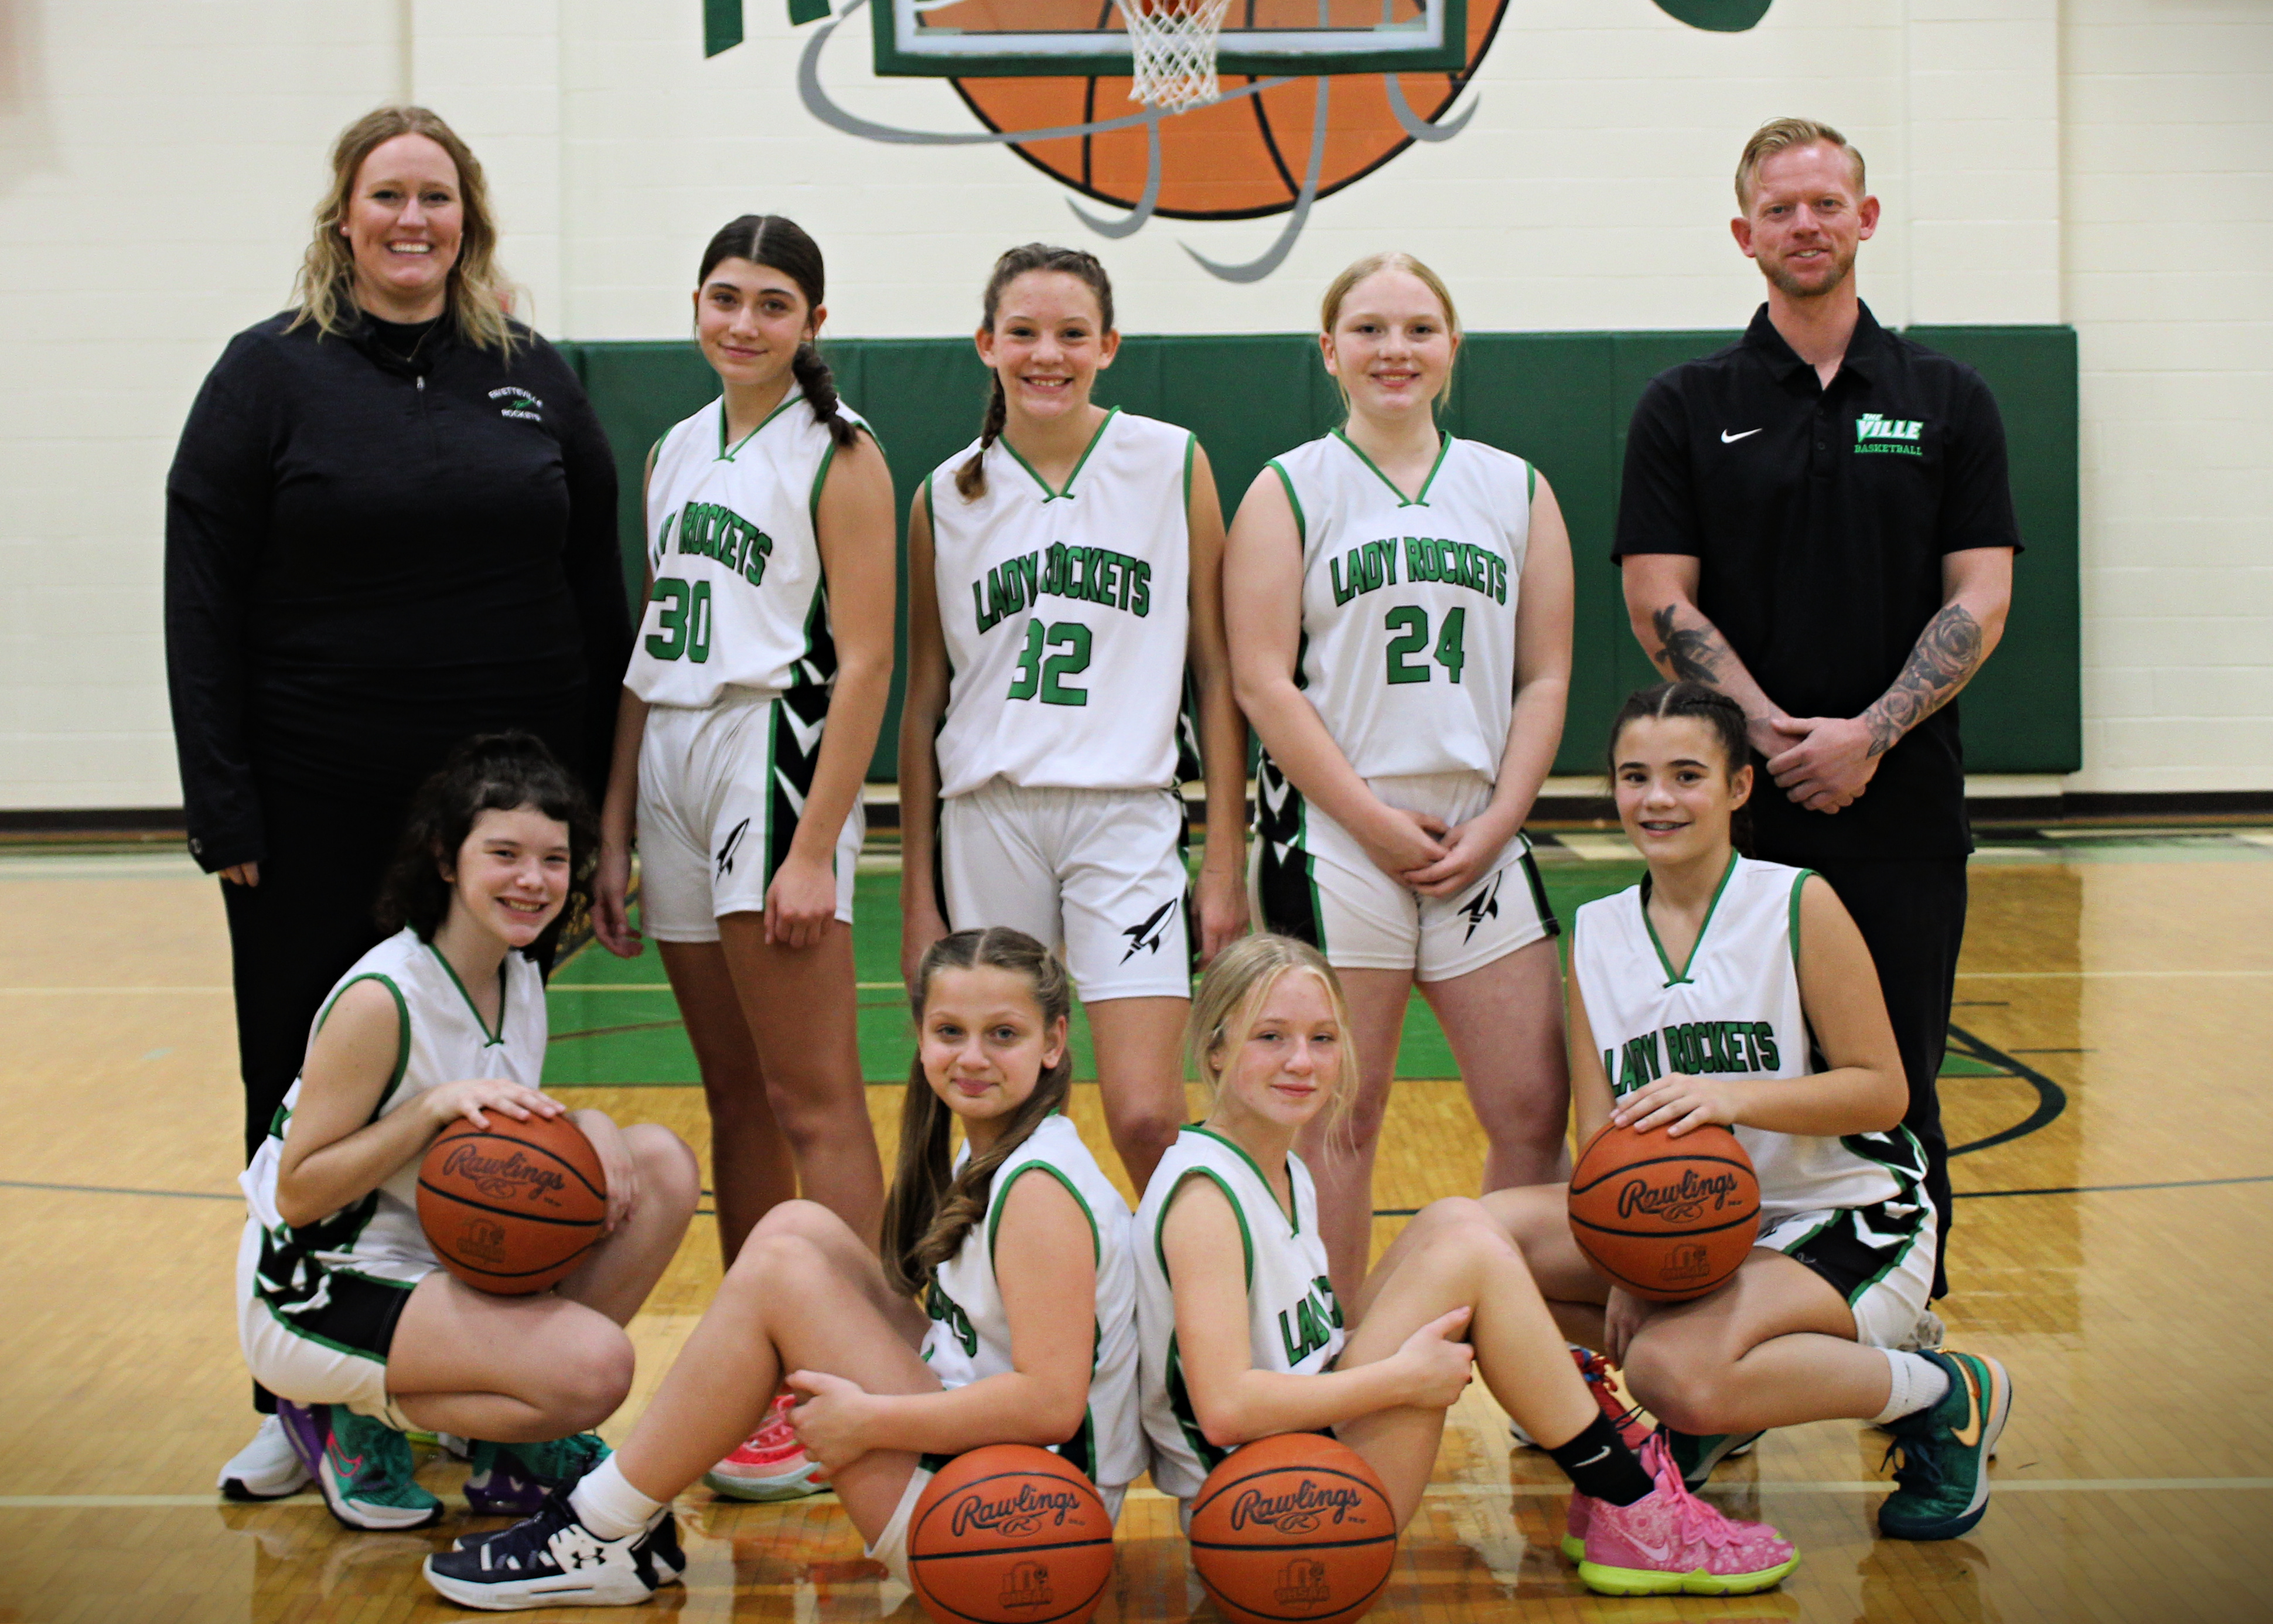 7th grade girls team picture